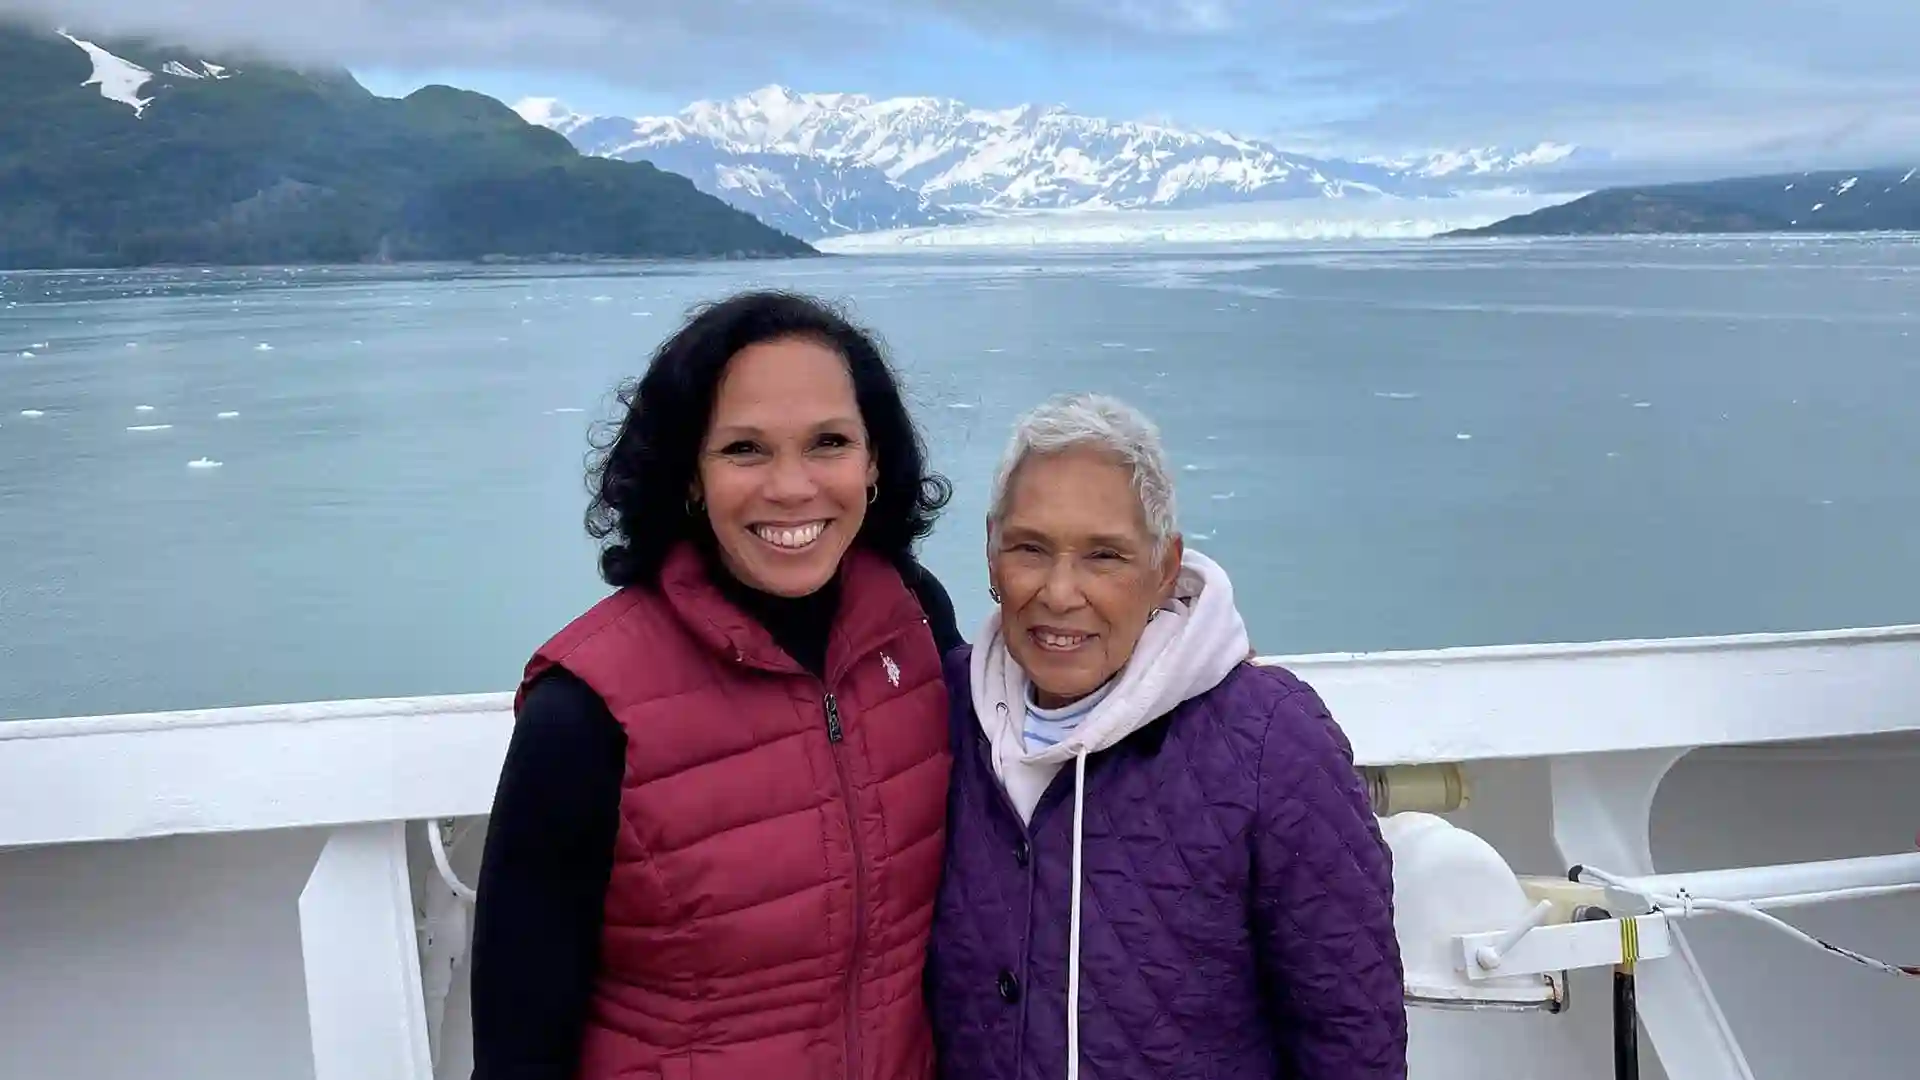 Post: A Daughter’s Love Leads to a Great Alaska Adventure